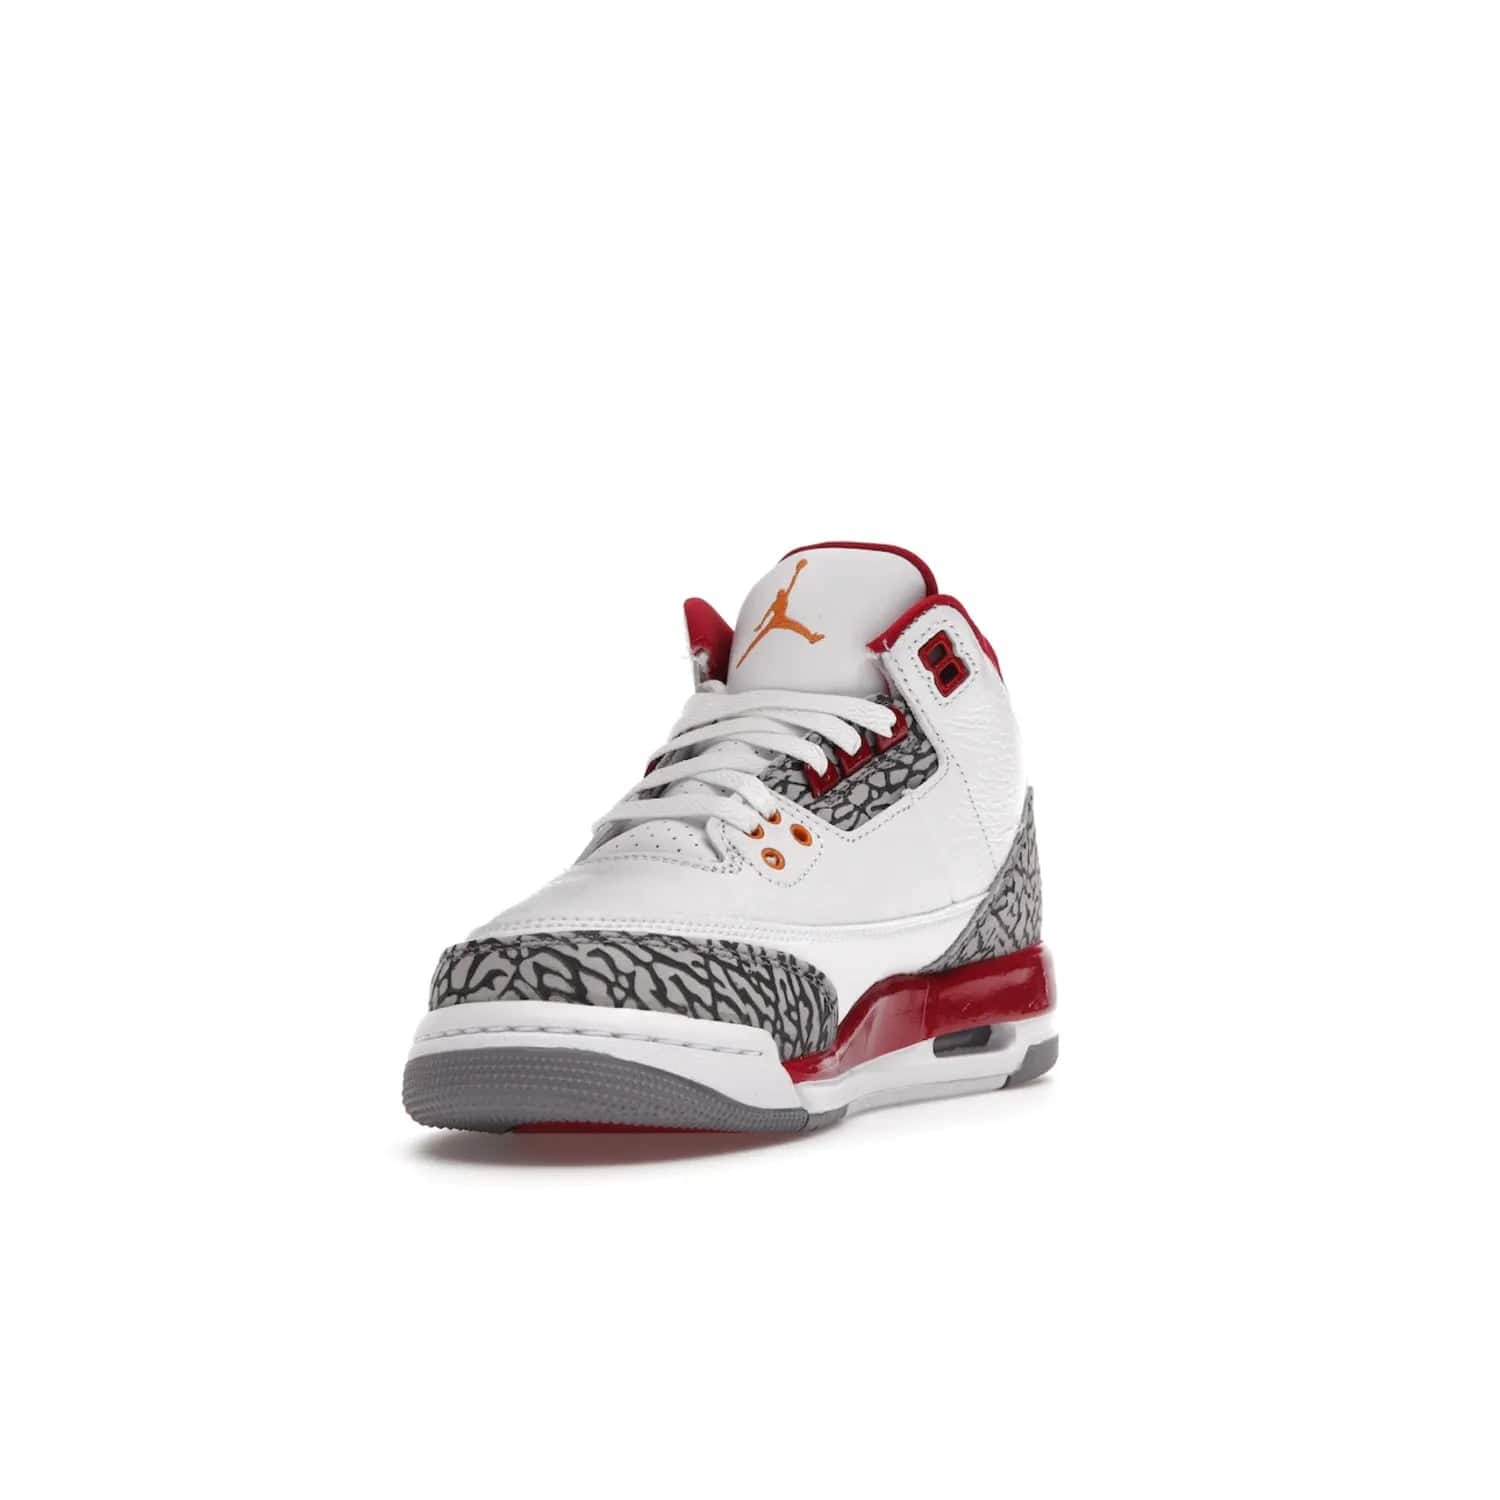 Jordan 3 Retro Cardinal (GS) - Image 13 - Only at www.BallersClubKickz.com - Shop the kid-sized Air Jordan 3 Retro Cardinal GS, released Feb 2022. White tumbled leather upper, light curry accenting, cement grey and classic red details throughout. Visible Air cushioning, midsole, and an eye-catching outsole. Show off your style with this fashionable streetwear silhouette.